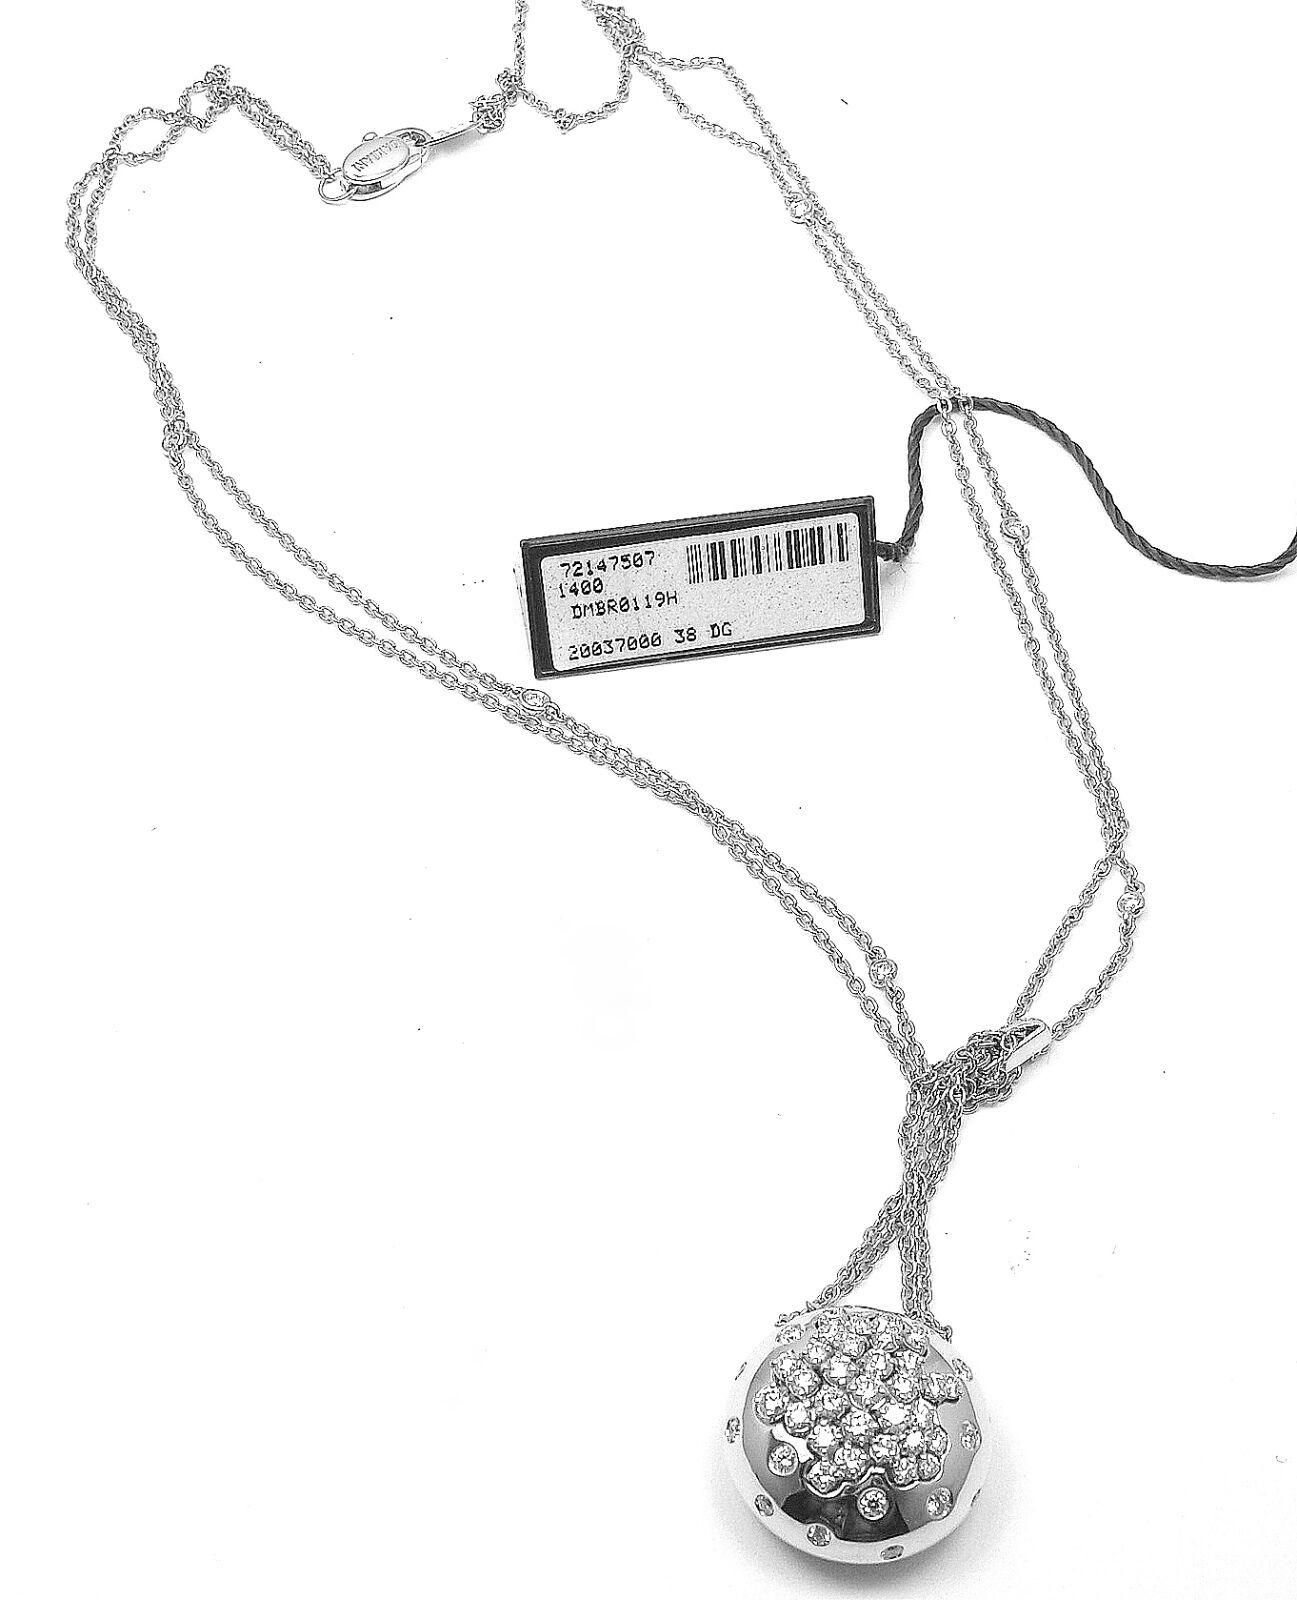 Damiani Diamond Drop Cluster White Gold Pendant Necklace In New Condition For Sale In Holland, PA